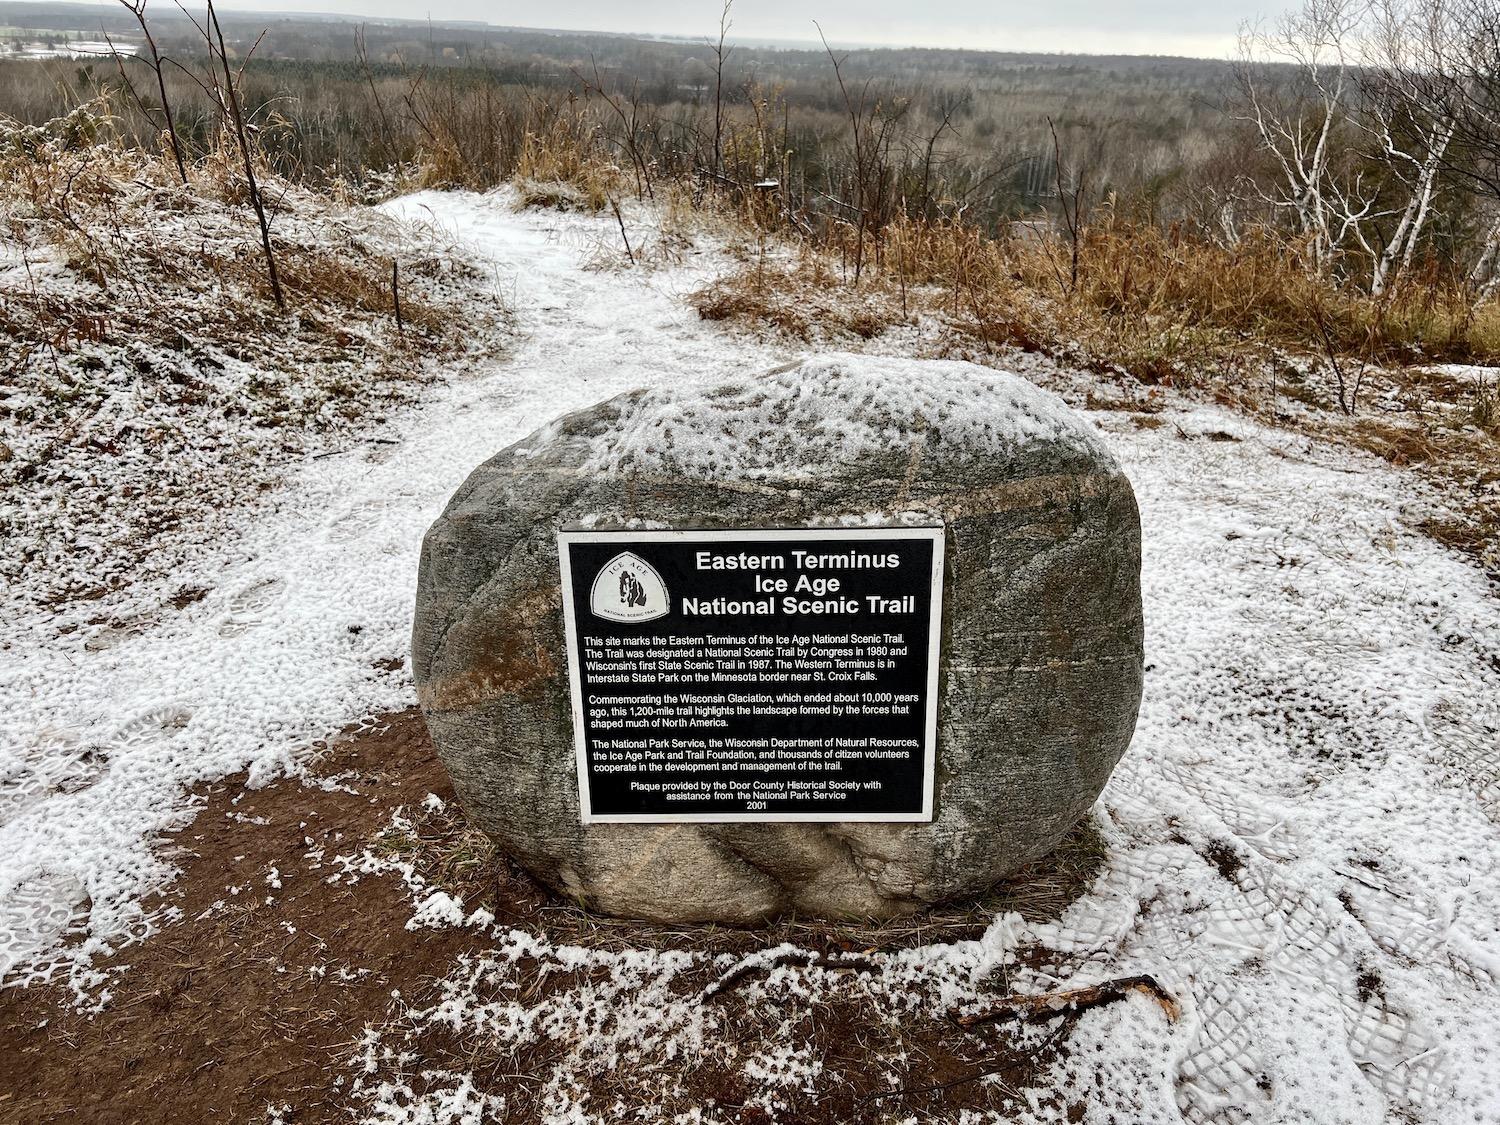 The eastern terminus of the Ice Age National Scenic Trail is marked by this rock and plaque in Potawatomi State Park.